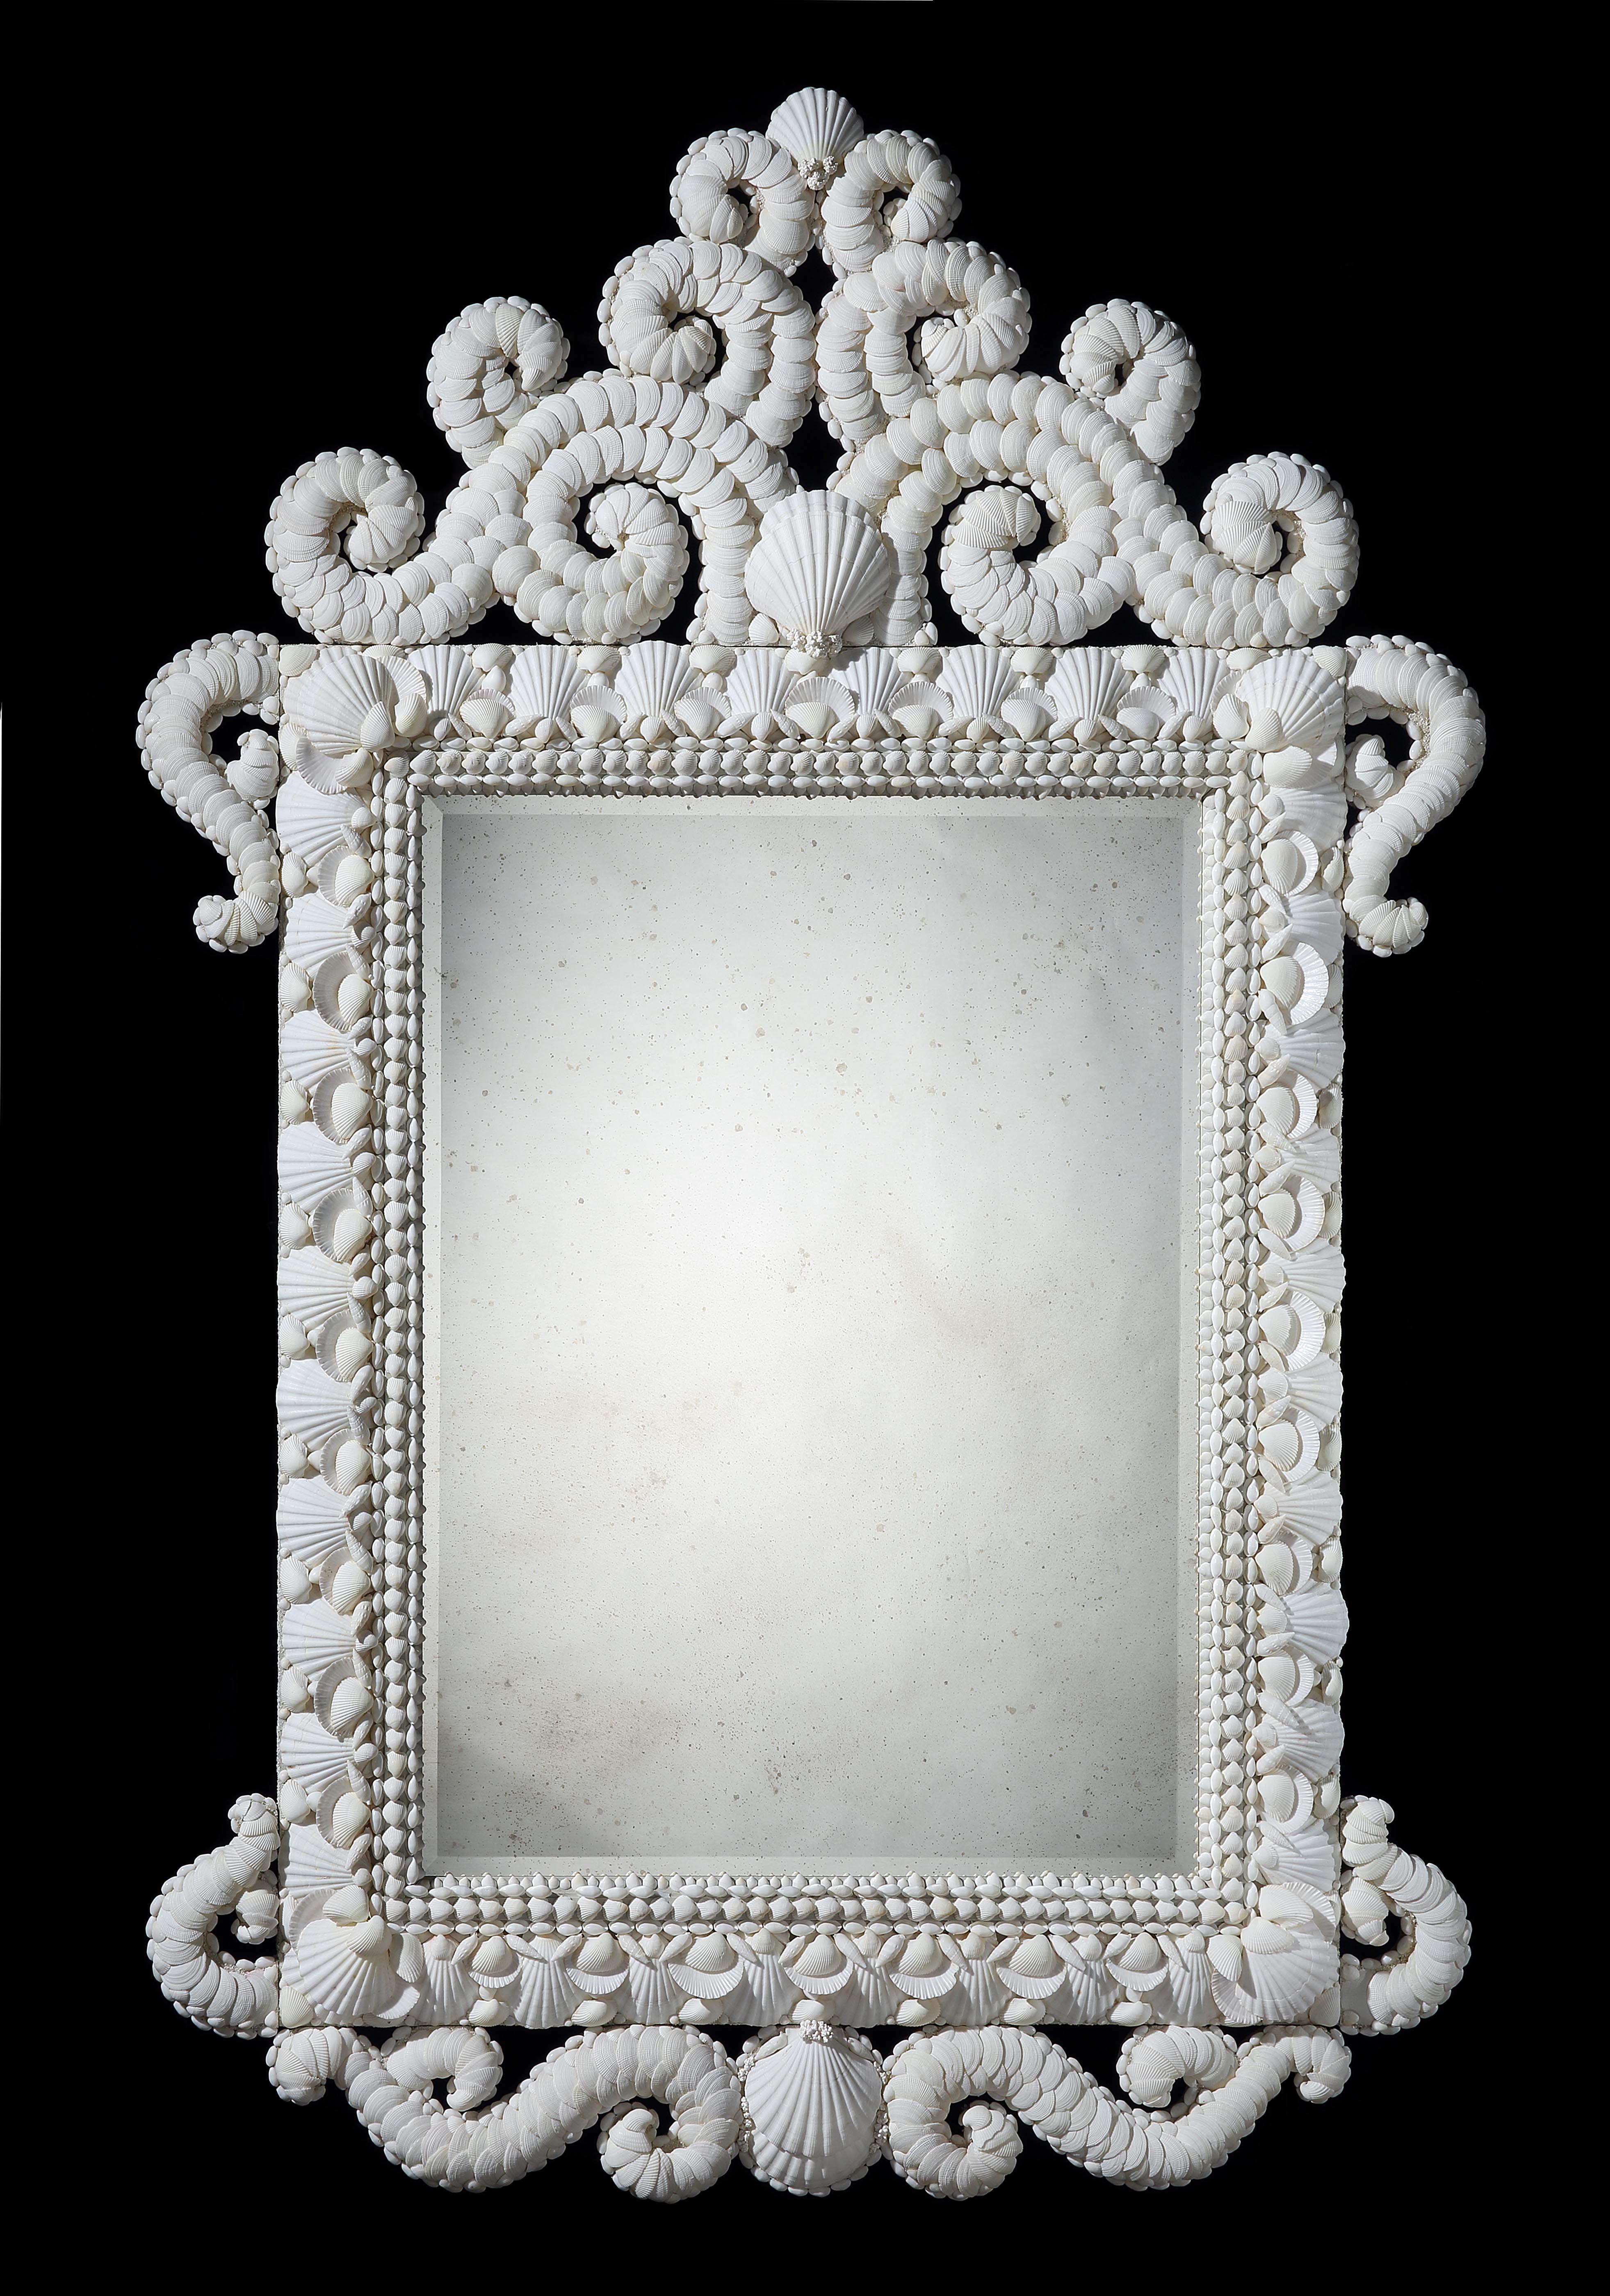 A very fine white shell mirror of large scale with cresting and scrolled sides and apron. The mirror plate bevelled and hand distressed. 

By Tess Morley.